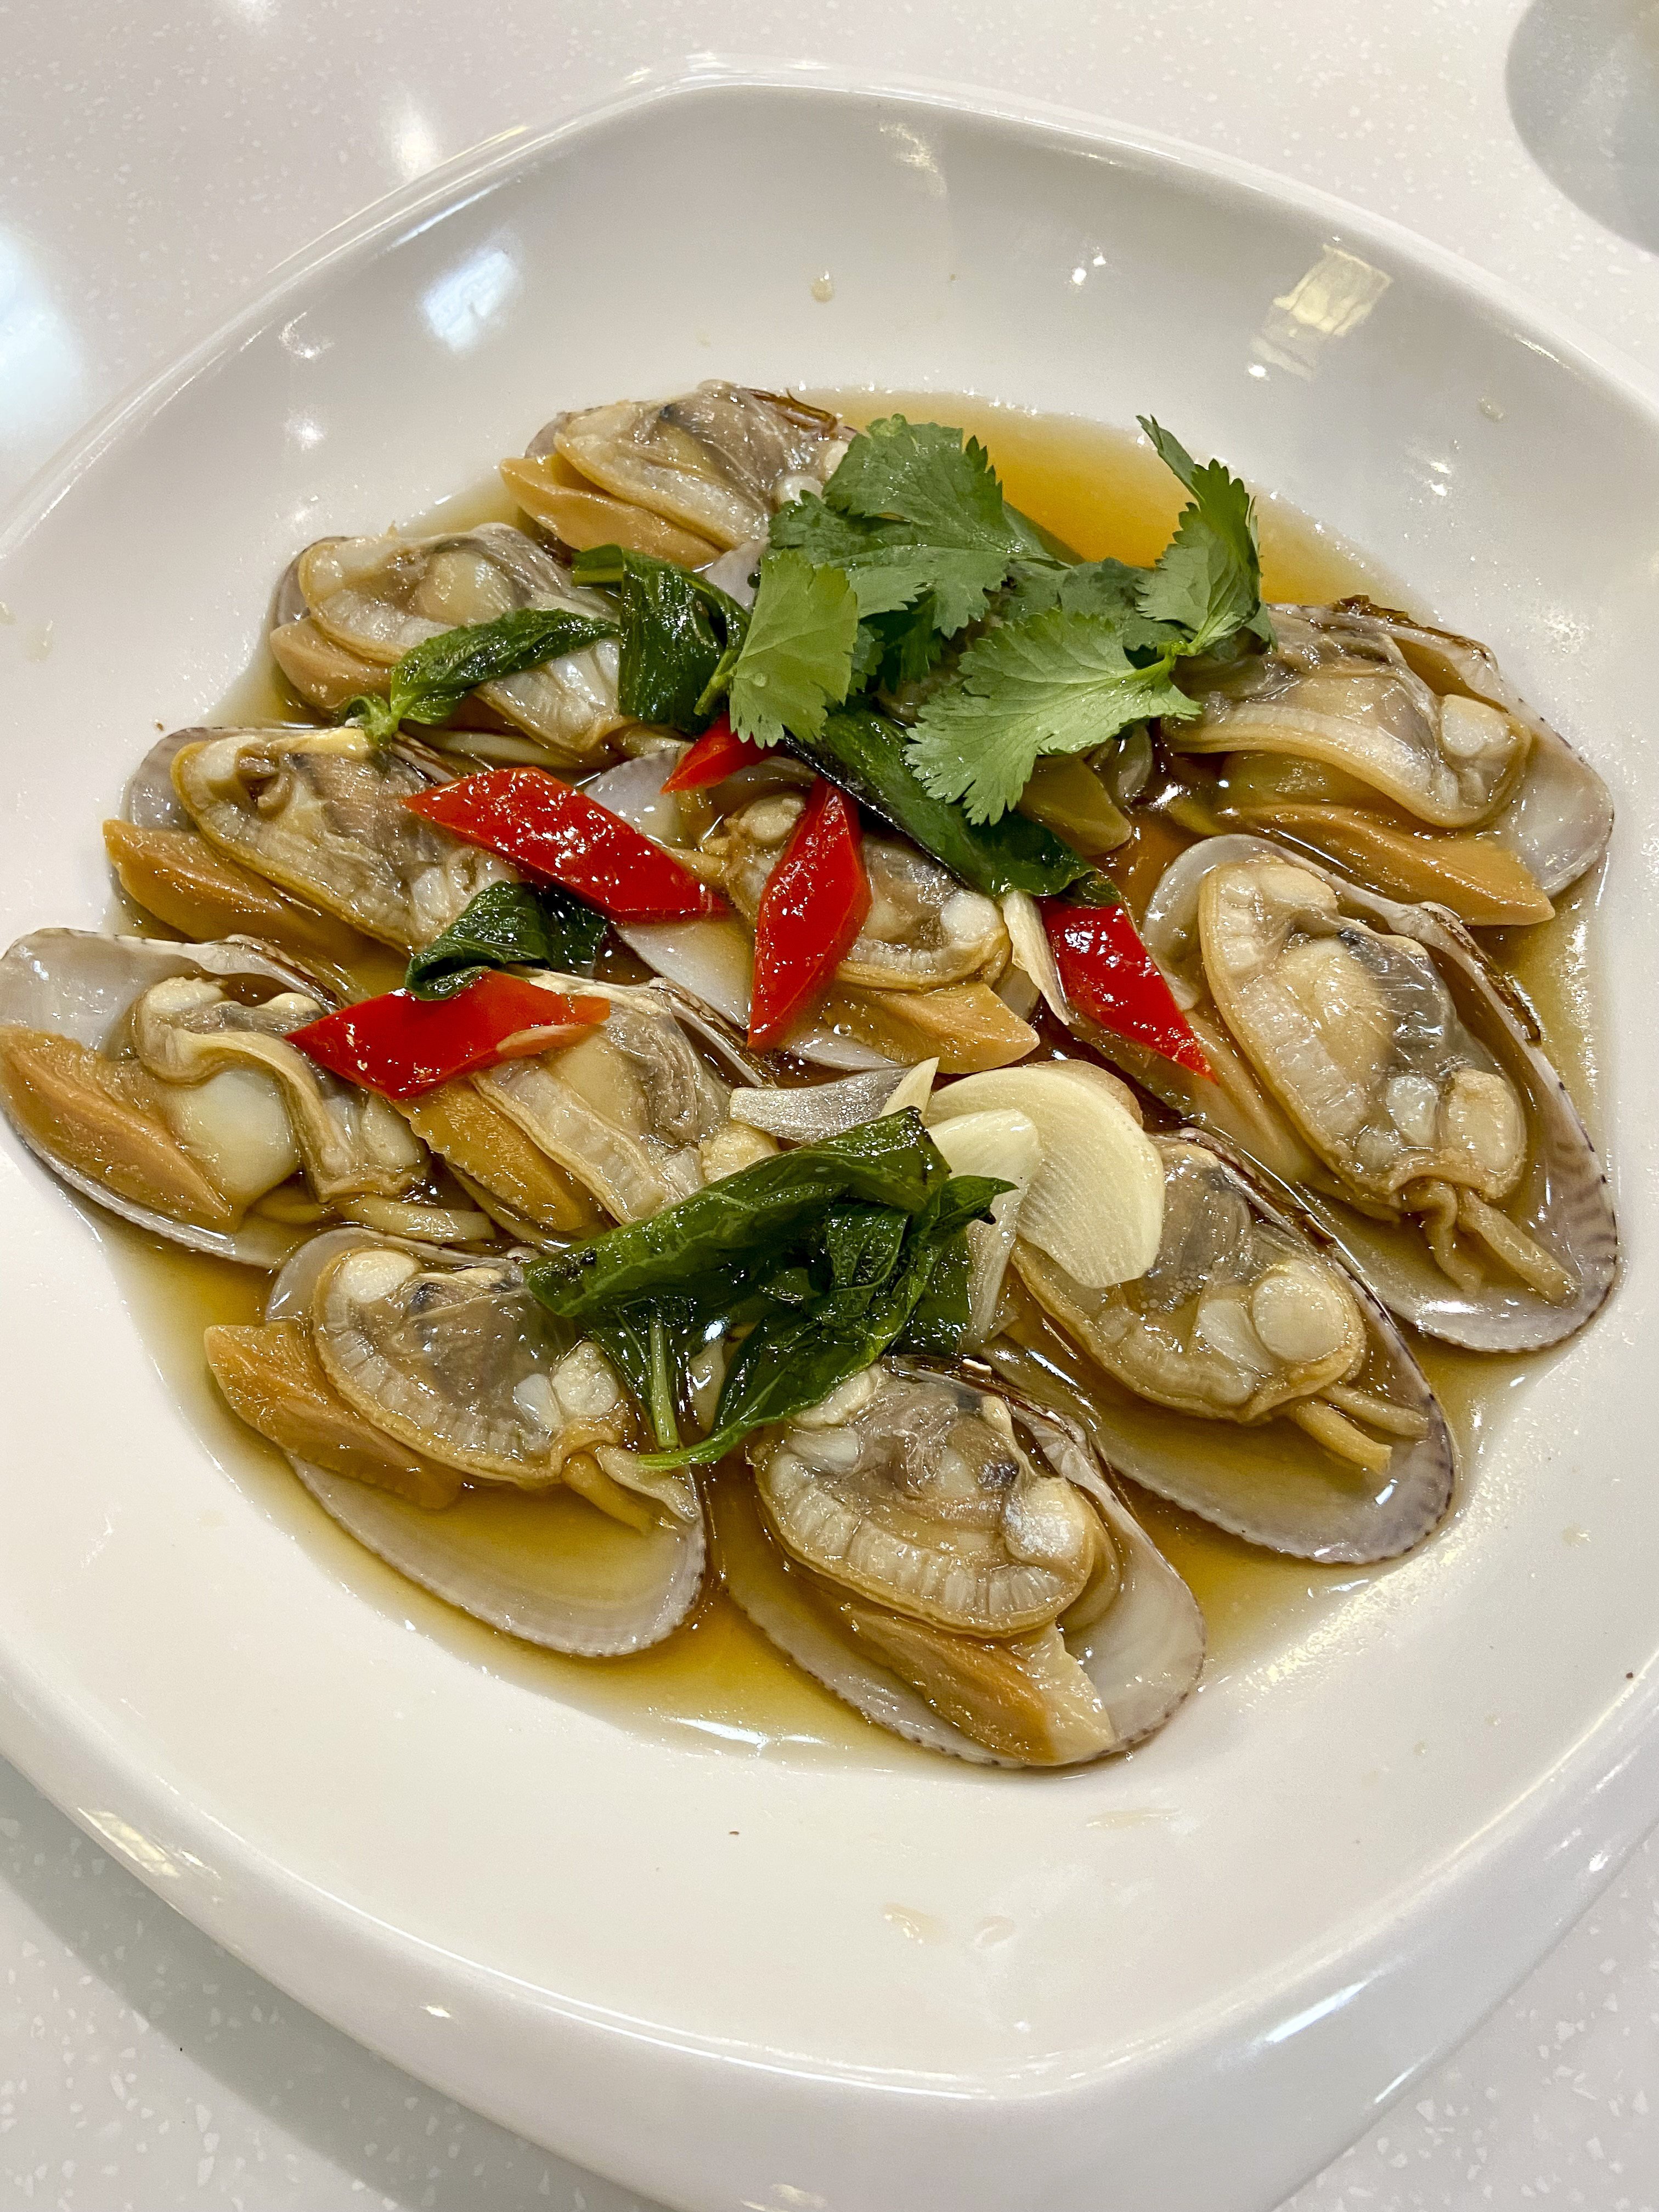 Poached clams in fish sauce got the meal off to a delicious start at Best Chiu Chow Restaurant in Wan Chai. Photo: Susan Jung